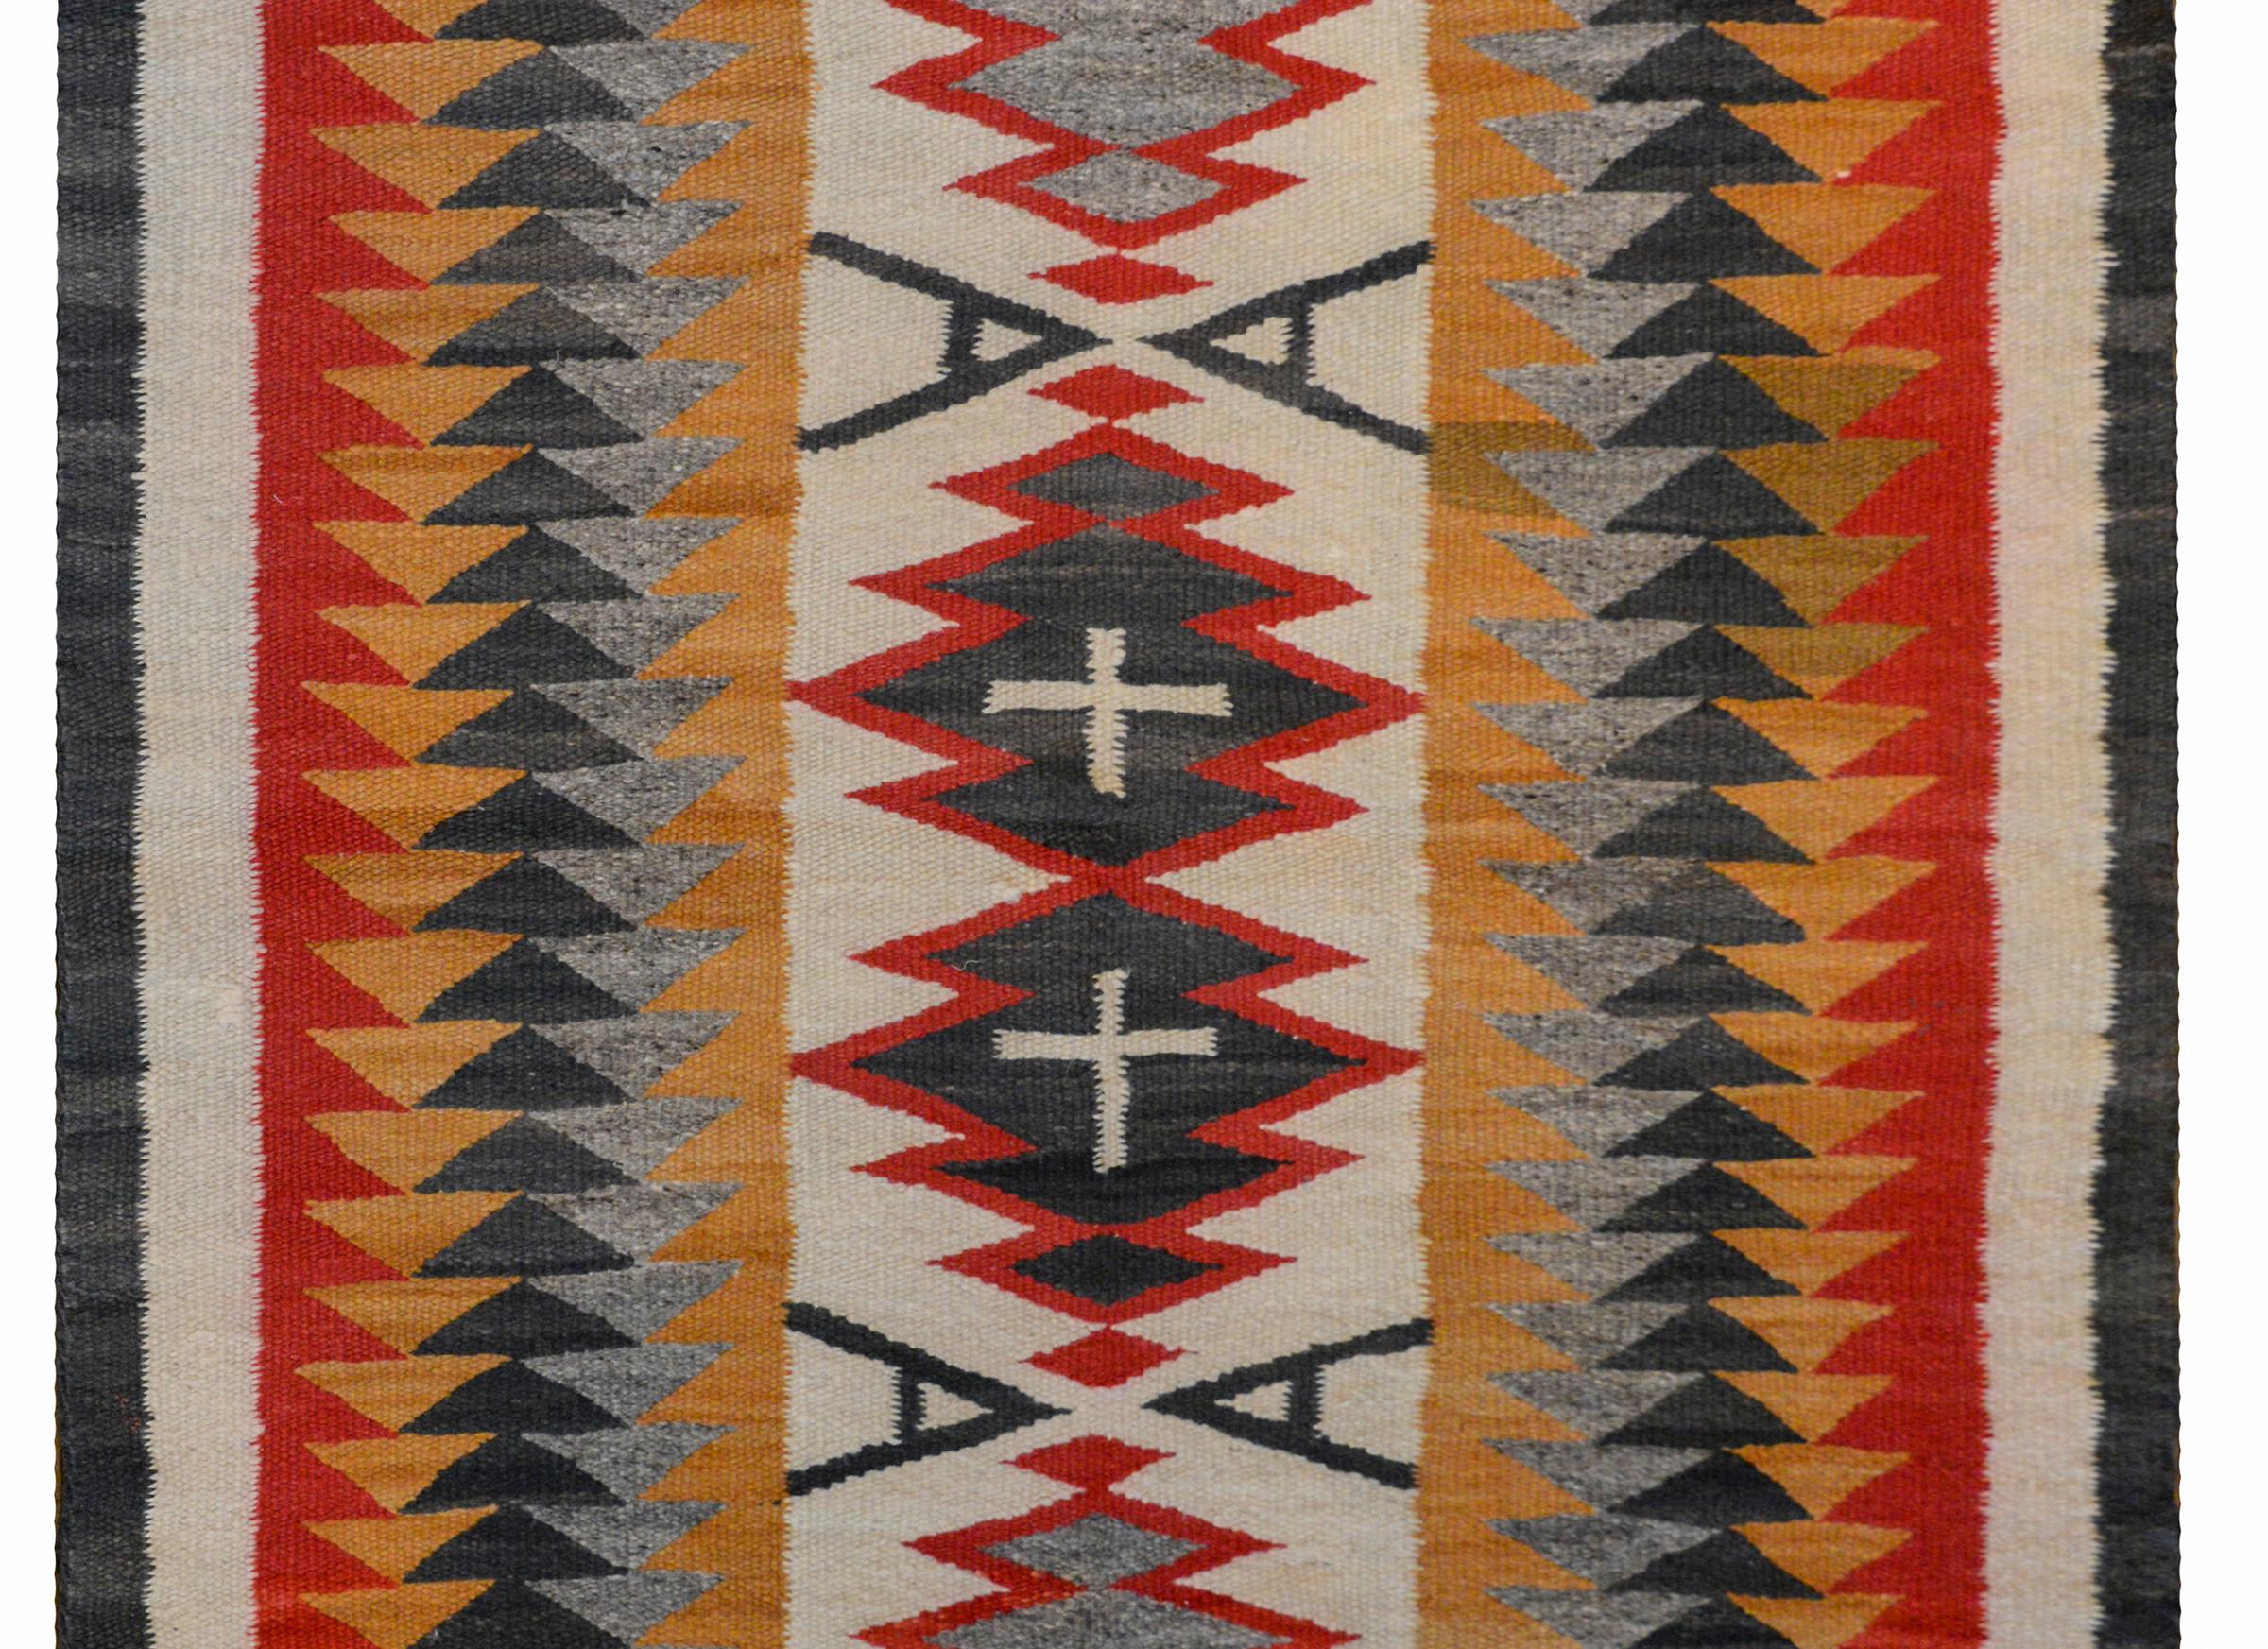 An outstanding early 20th century Navajo rug with four large medallions, two with white crosses flanked by pairs of black 